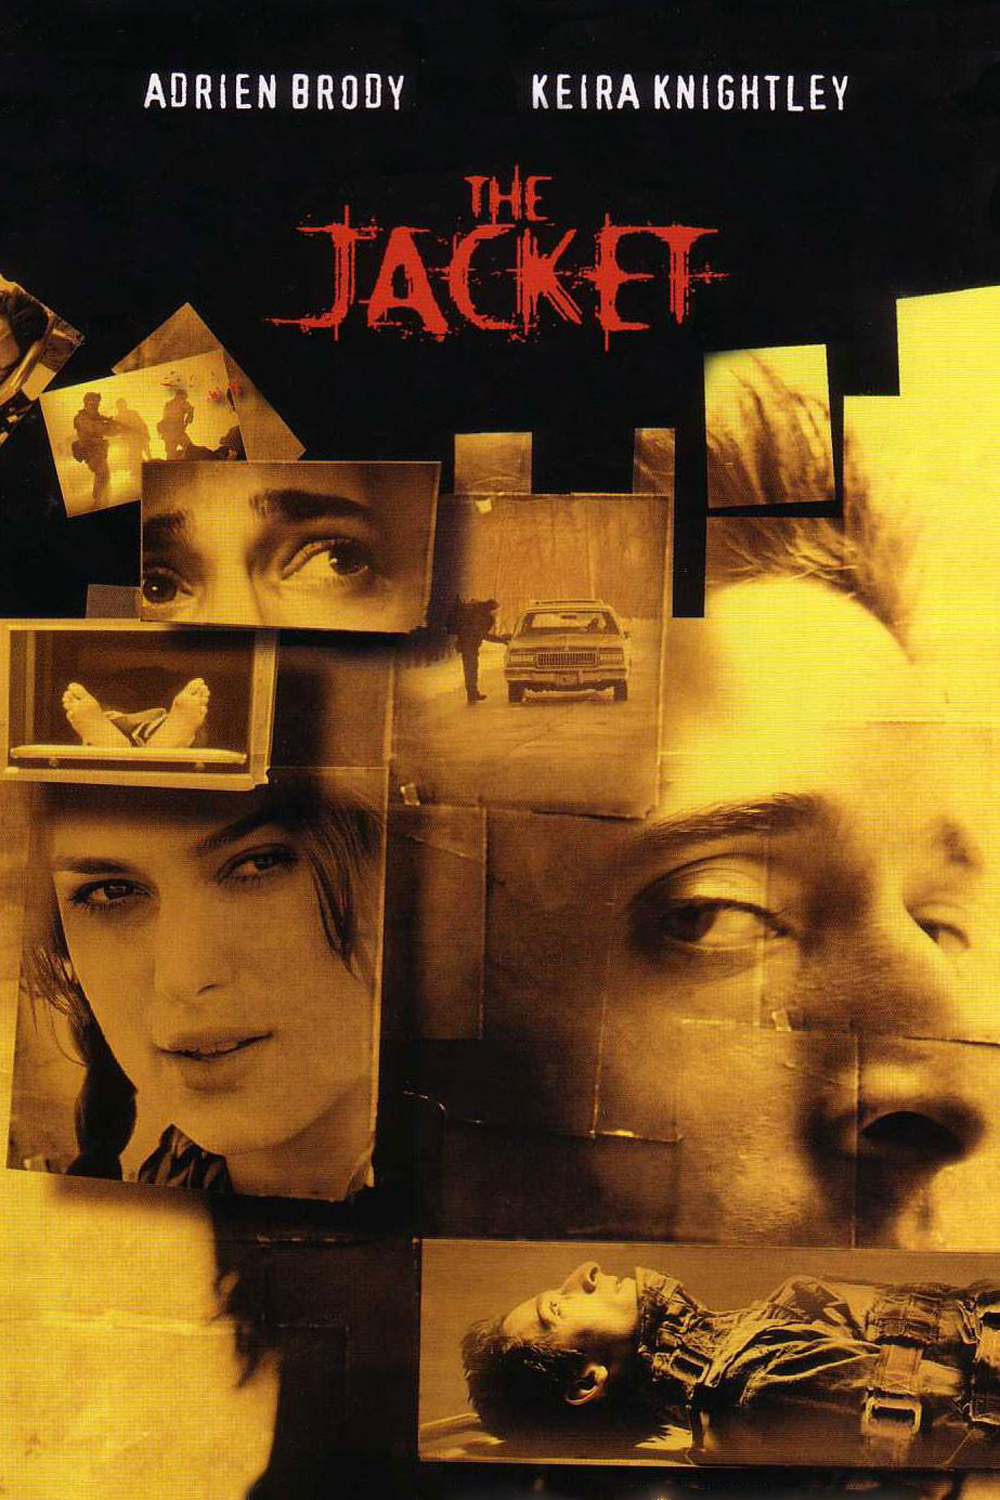 Poster for the movie "The Jacket"